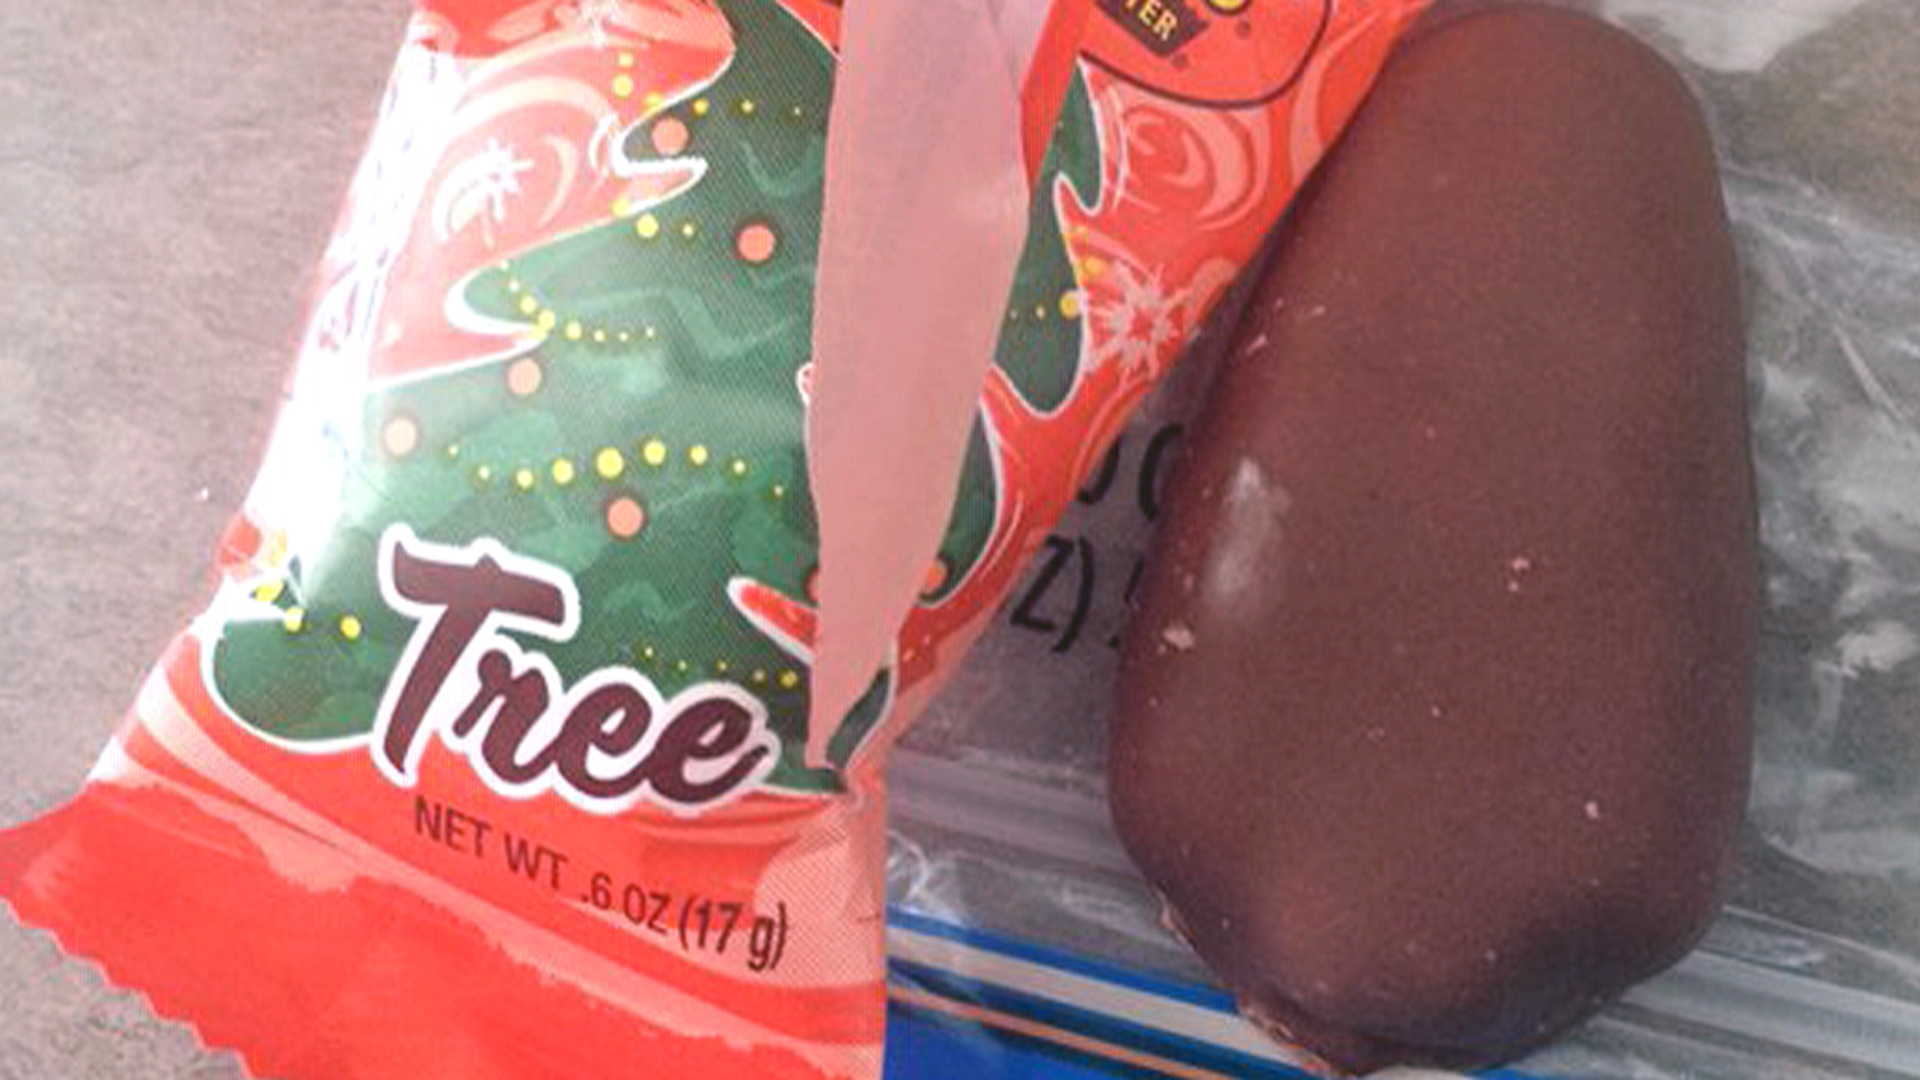 The Neighbor Gift Everyone Wants: Reese's Trees - Crazy Little Projects